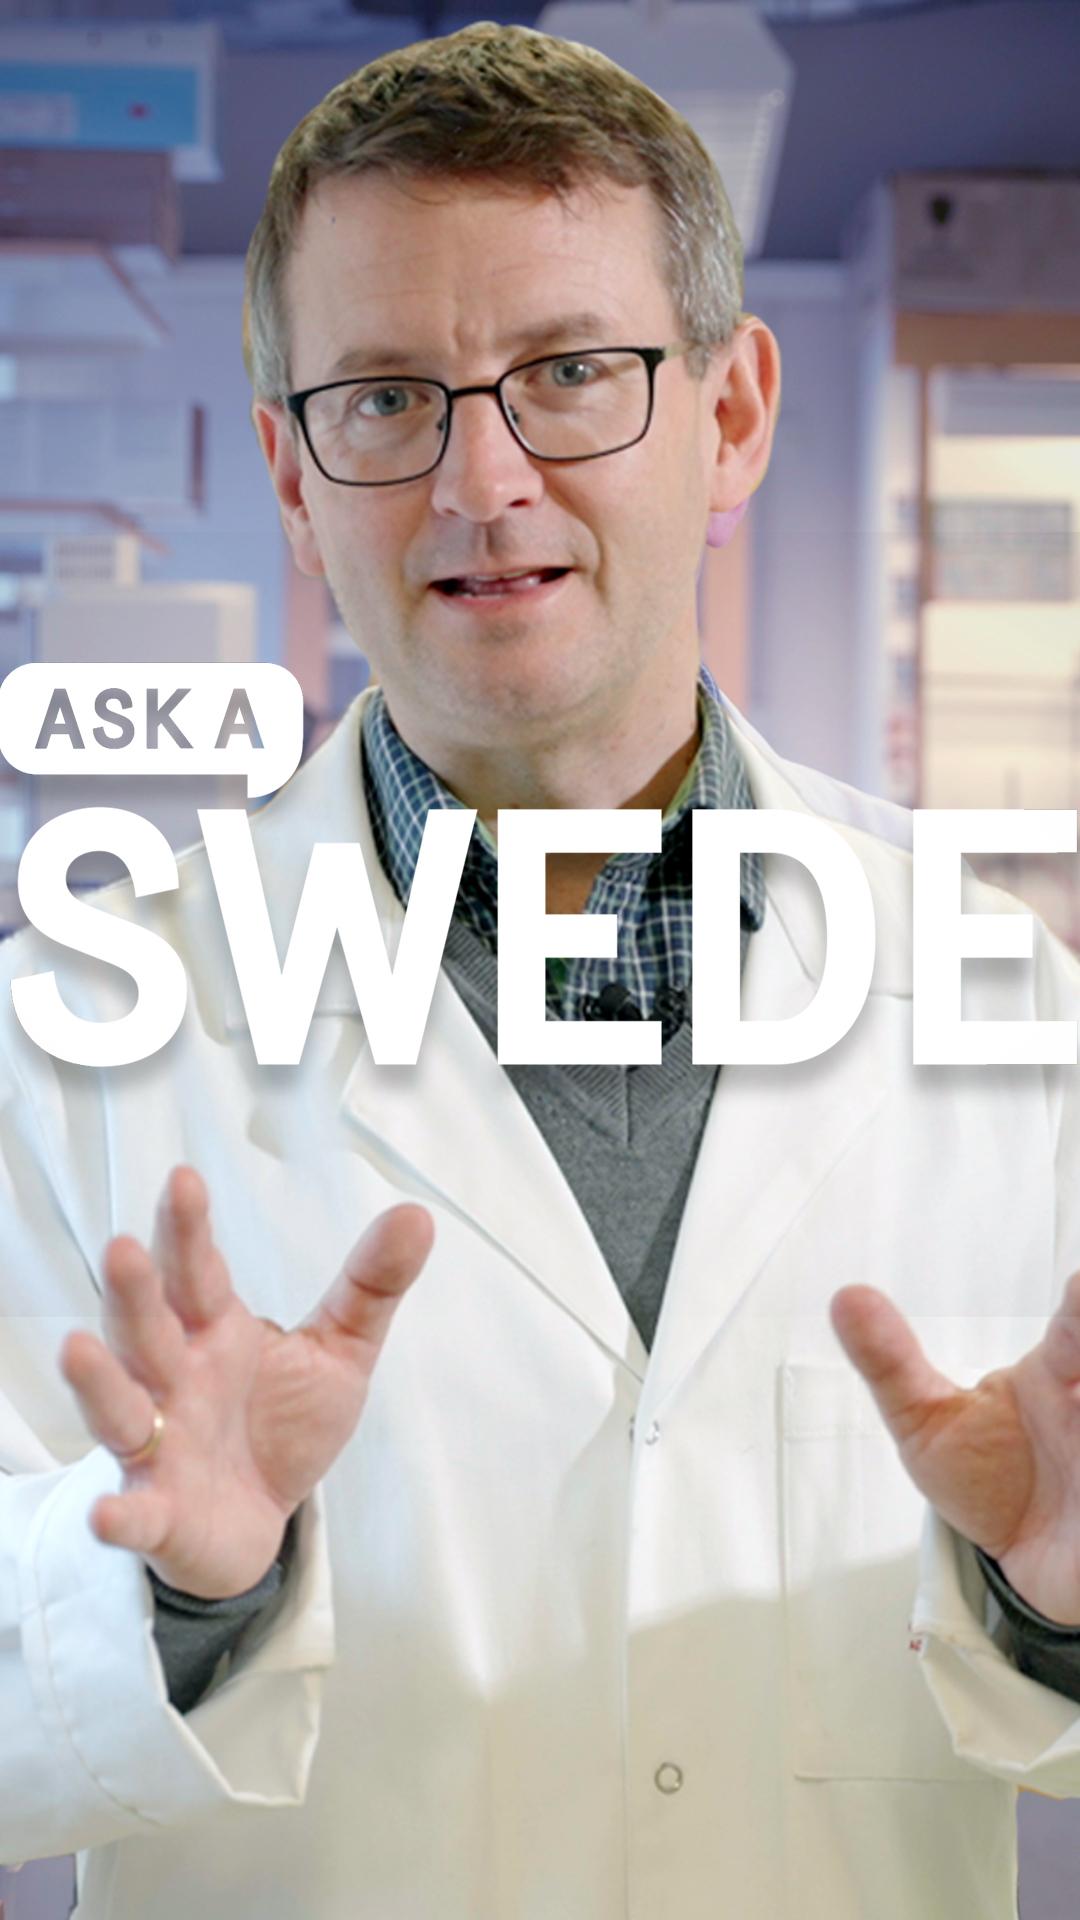 Ask a Swede